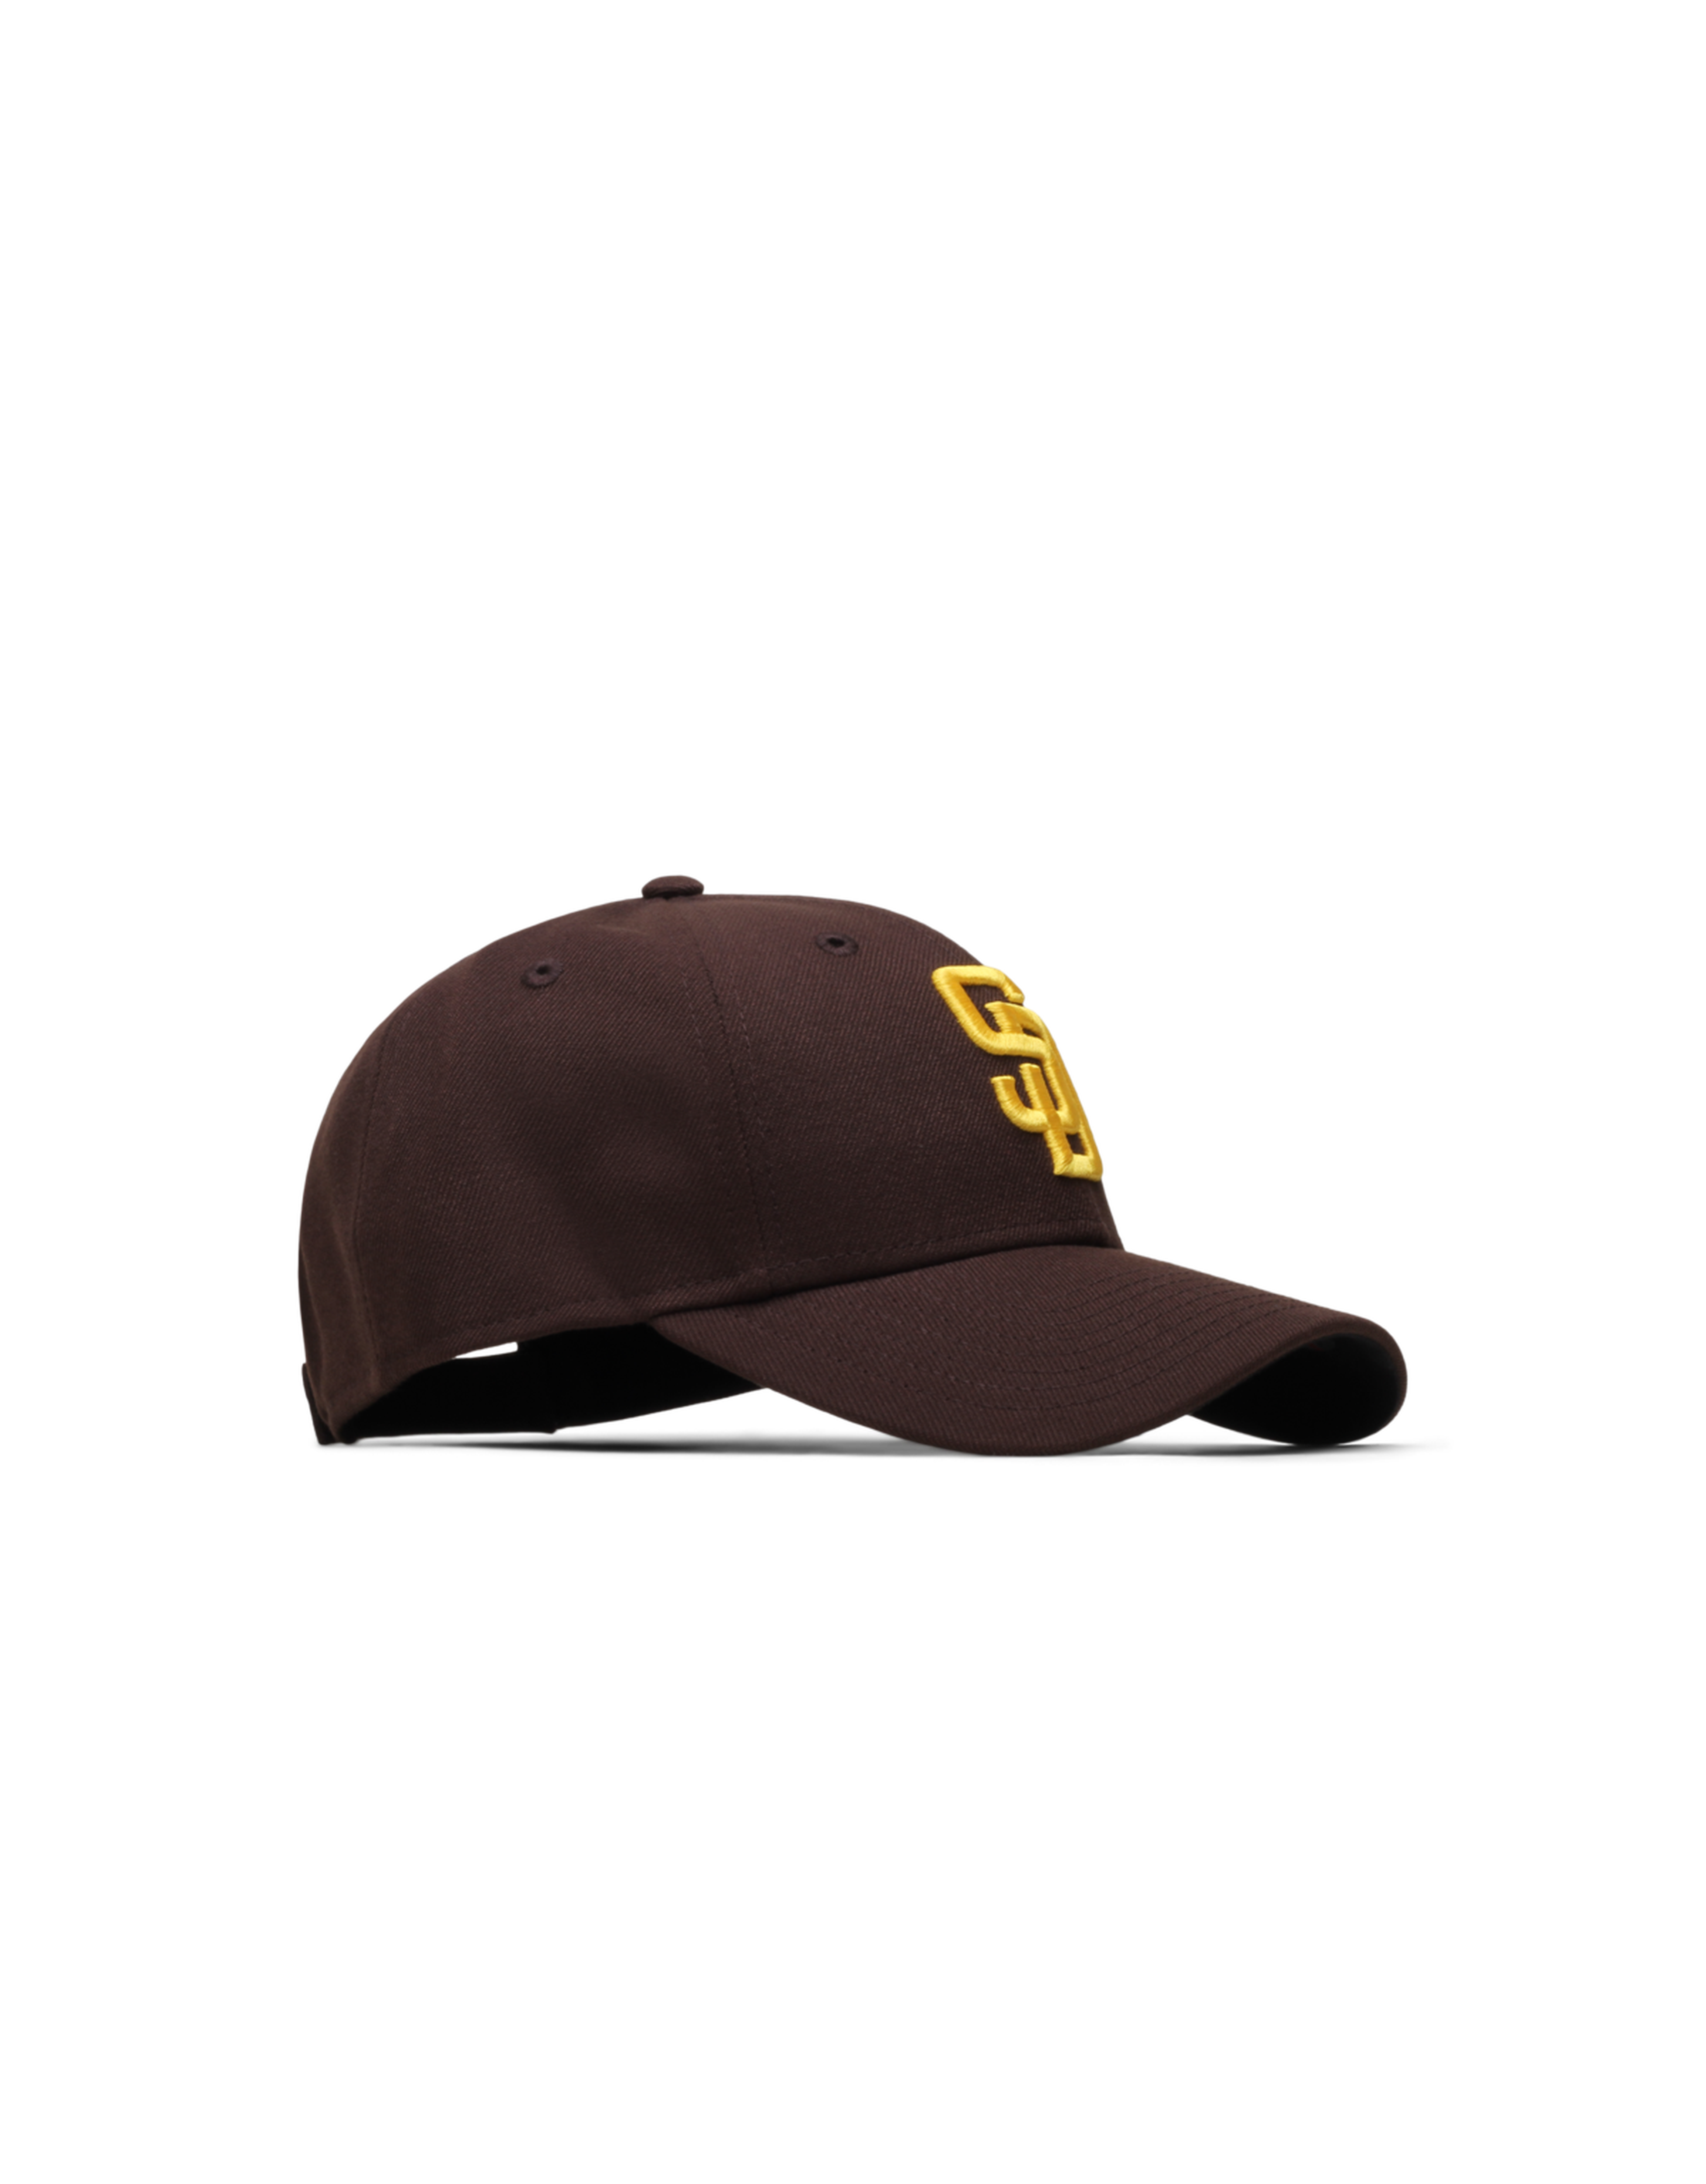 San Diego Padres 9FORTY Adjustable Cap